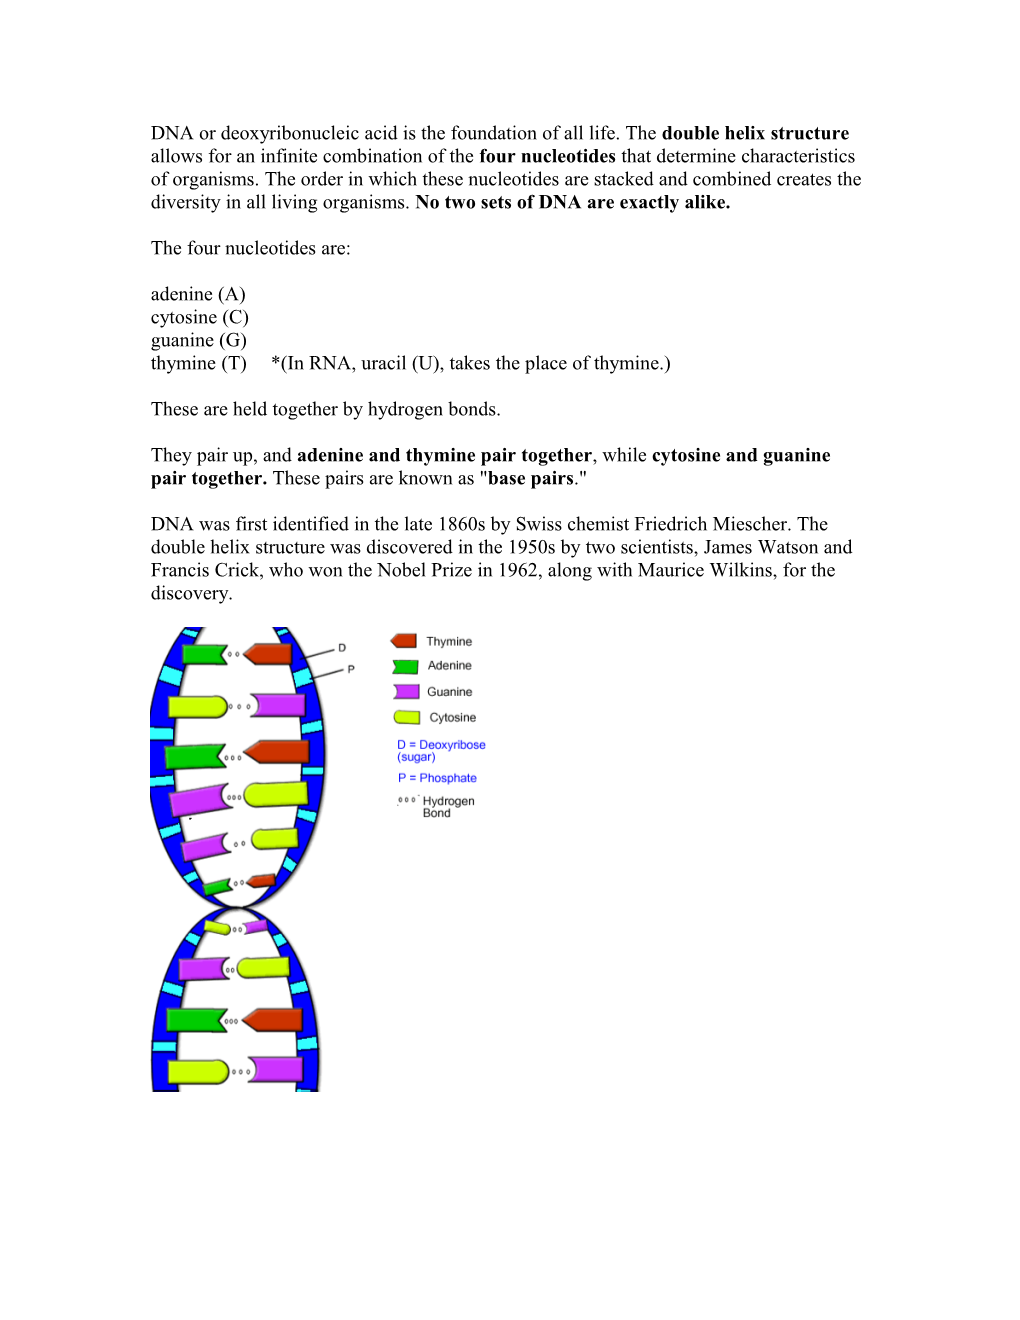 DNA Or Deoxyribonucleic Acid Is the Foundation of All Life